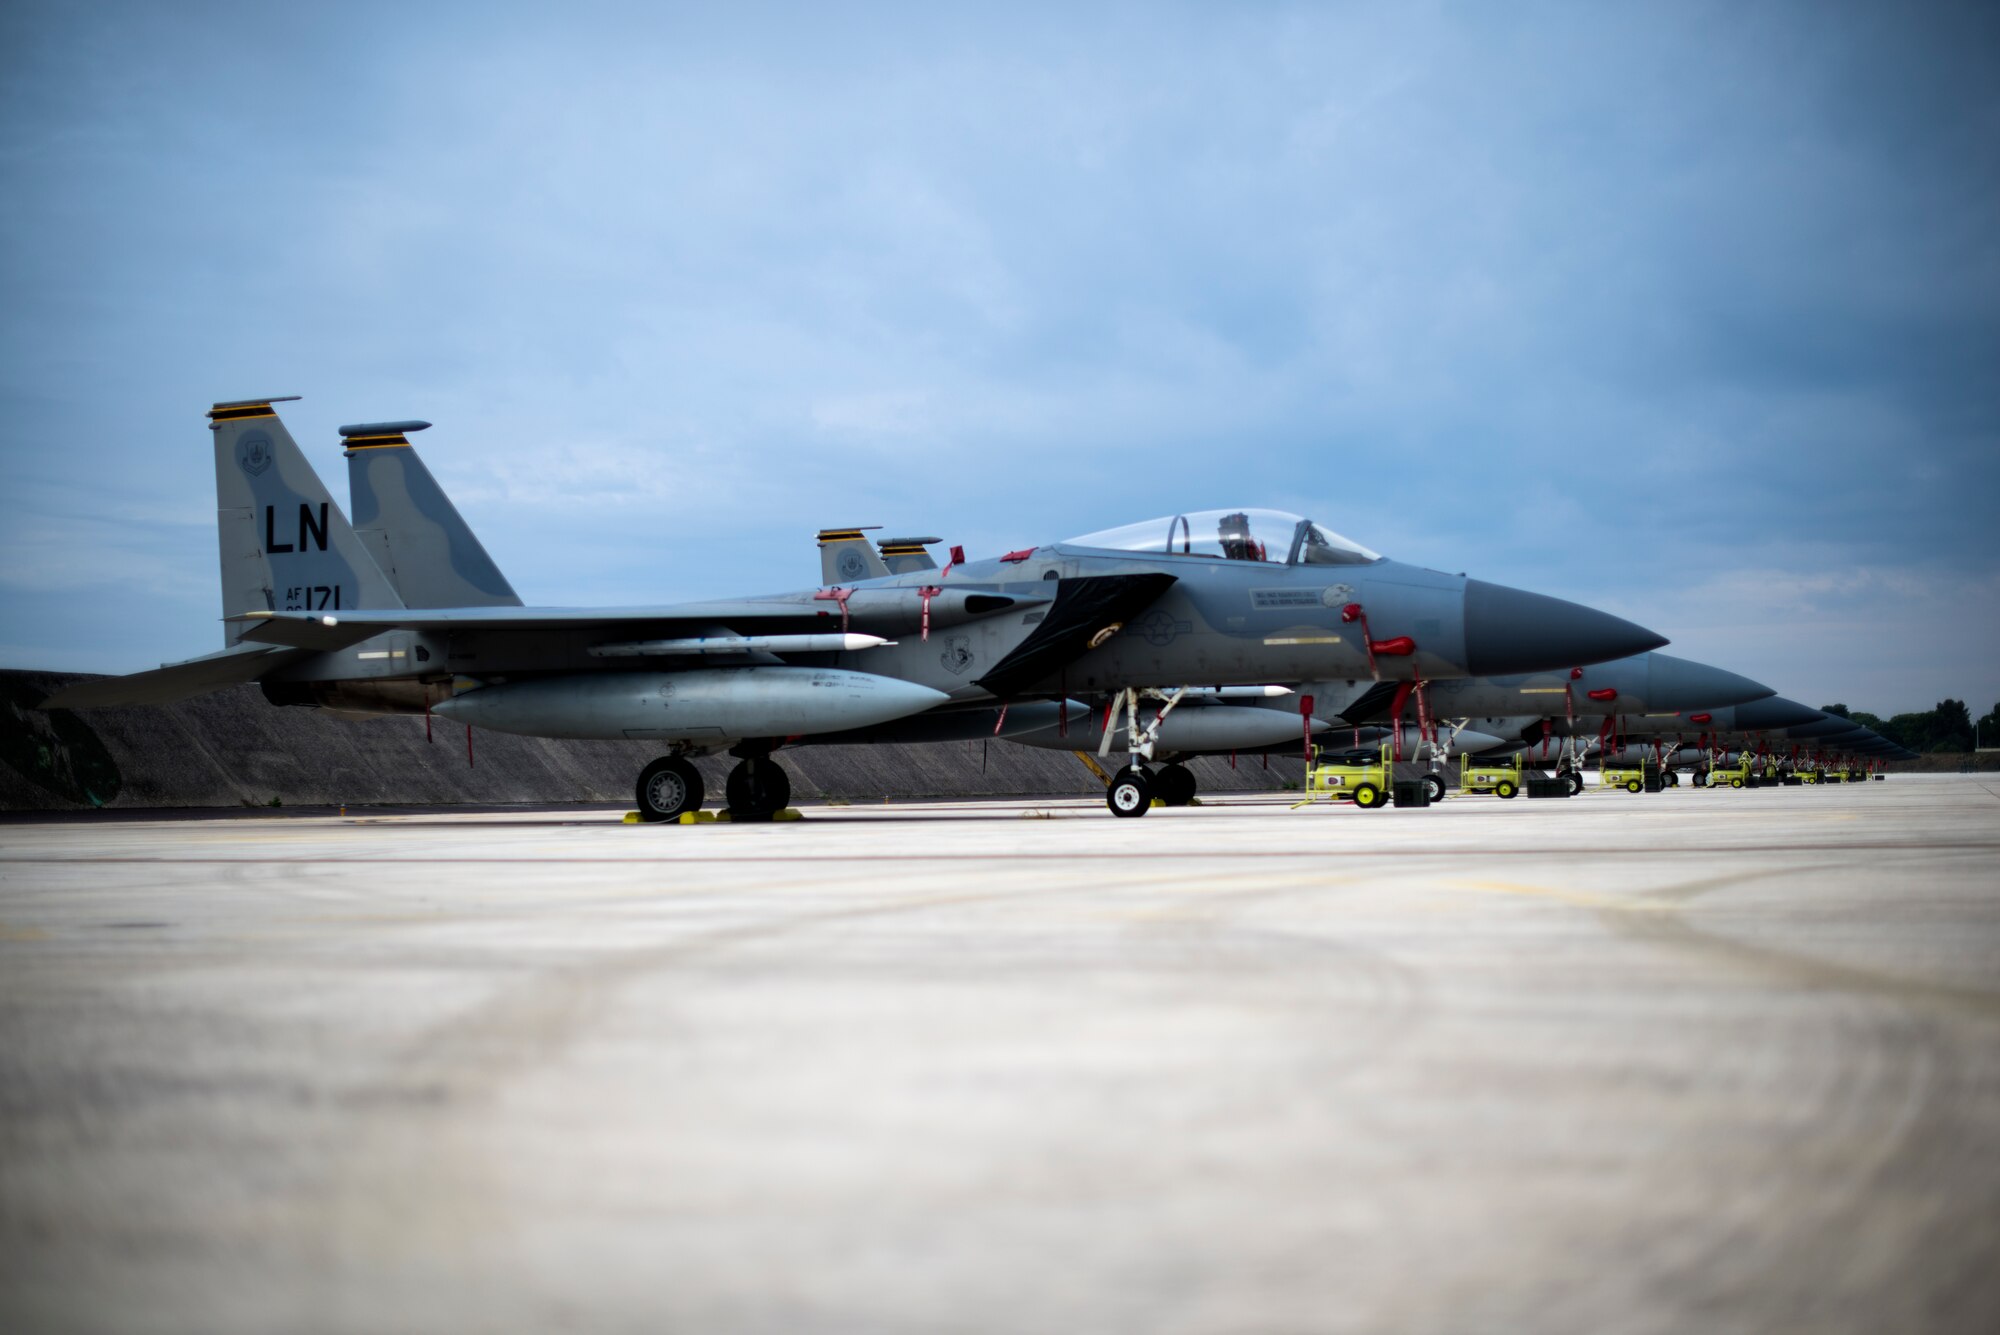 F-15C Eagles and an F-15D Eagle are parked on the flightline at Amendola Air Base, Italy, Nov. 19, 2018. F-15C Eagles and an F-15D Eagle will be participating in the NATO Tactical Leadership Programme 18-4. TLP has prepared hundreds of NATO and allied forces’ flight leaders to be mission commanders. (U.S. Air Force photo/ Senior Airman Malcolm Mayfield)